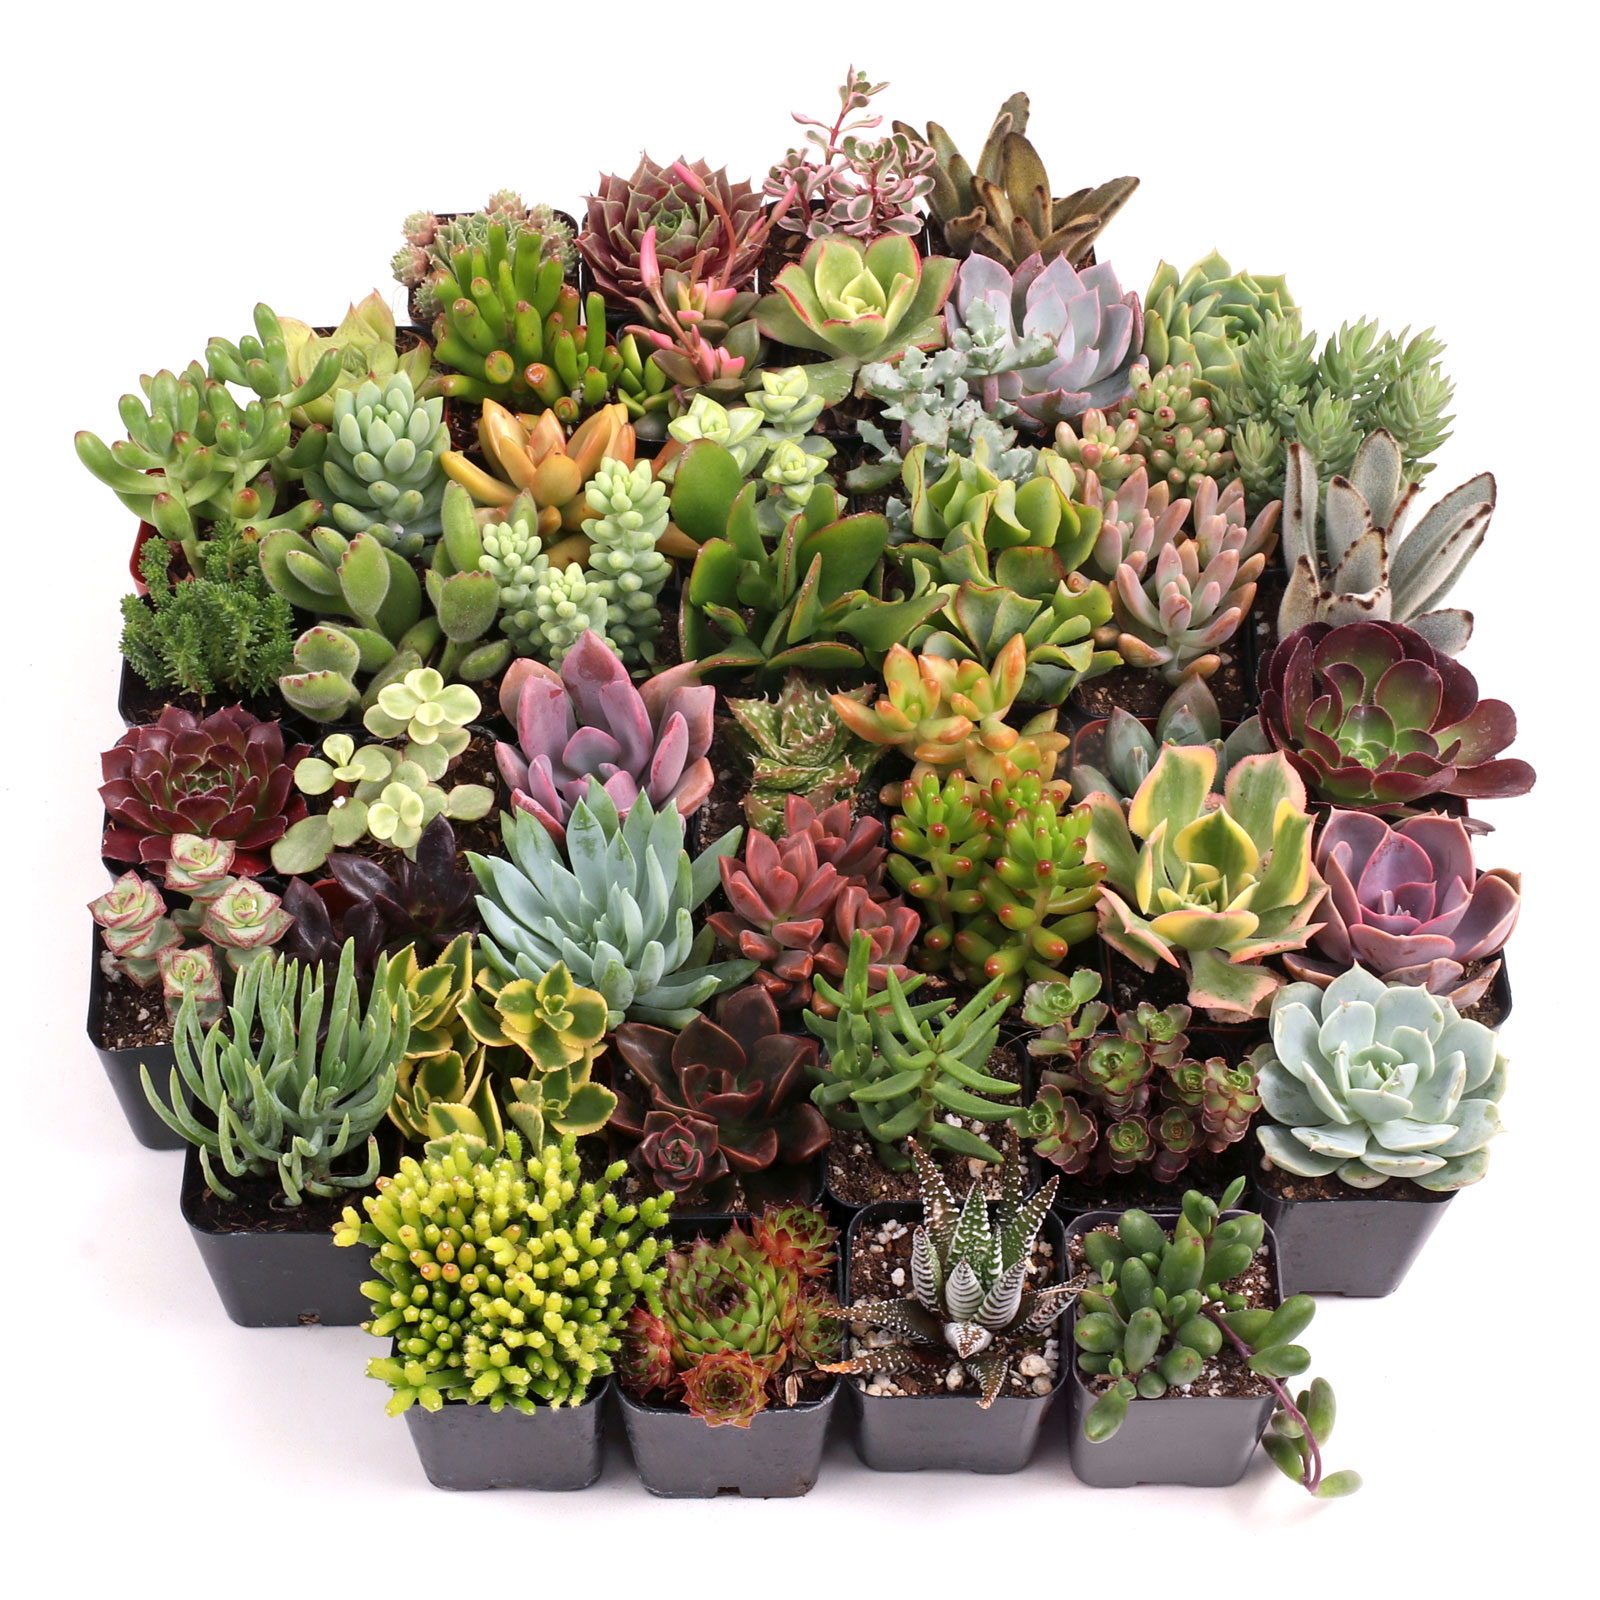 MCG 48 Special™ Bulk Succulent Assortment - 48 Types - 2in Pots Questions & Answers